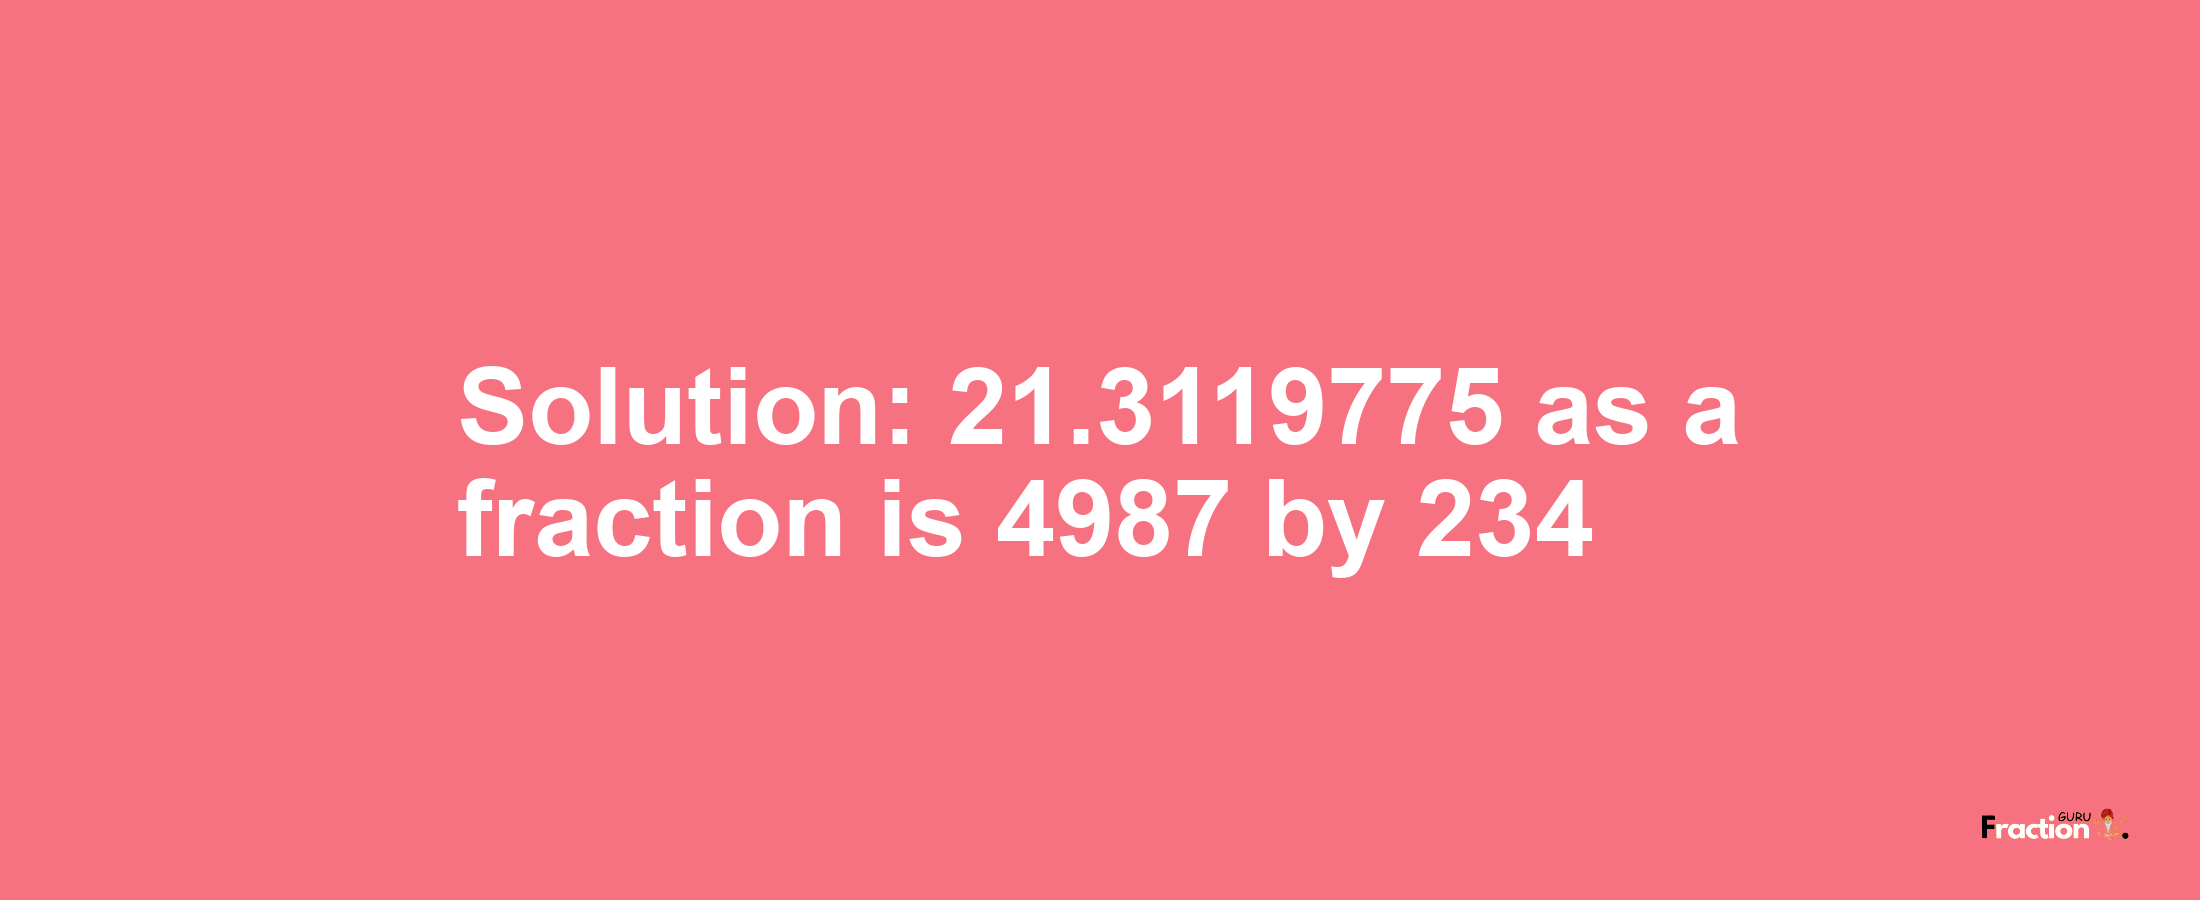 Solution:21.3119775 as a fraction is 4987/234